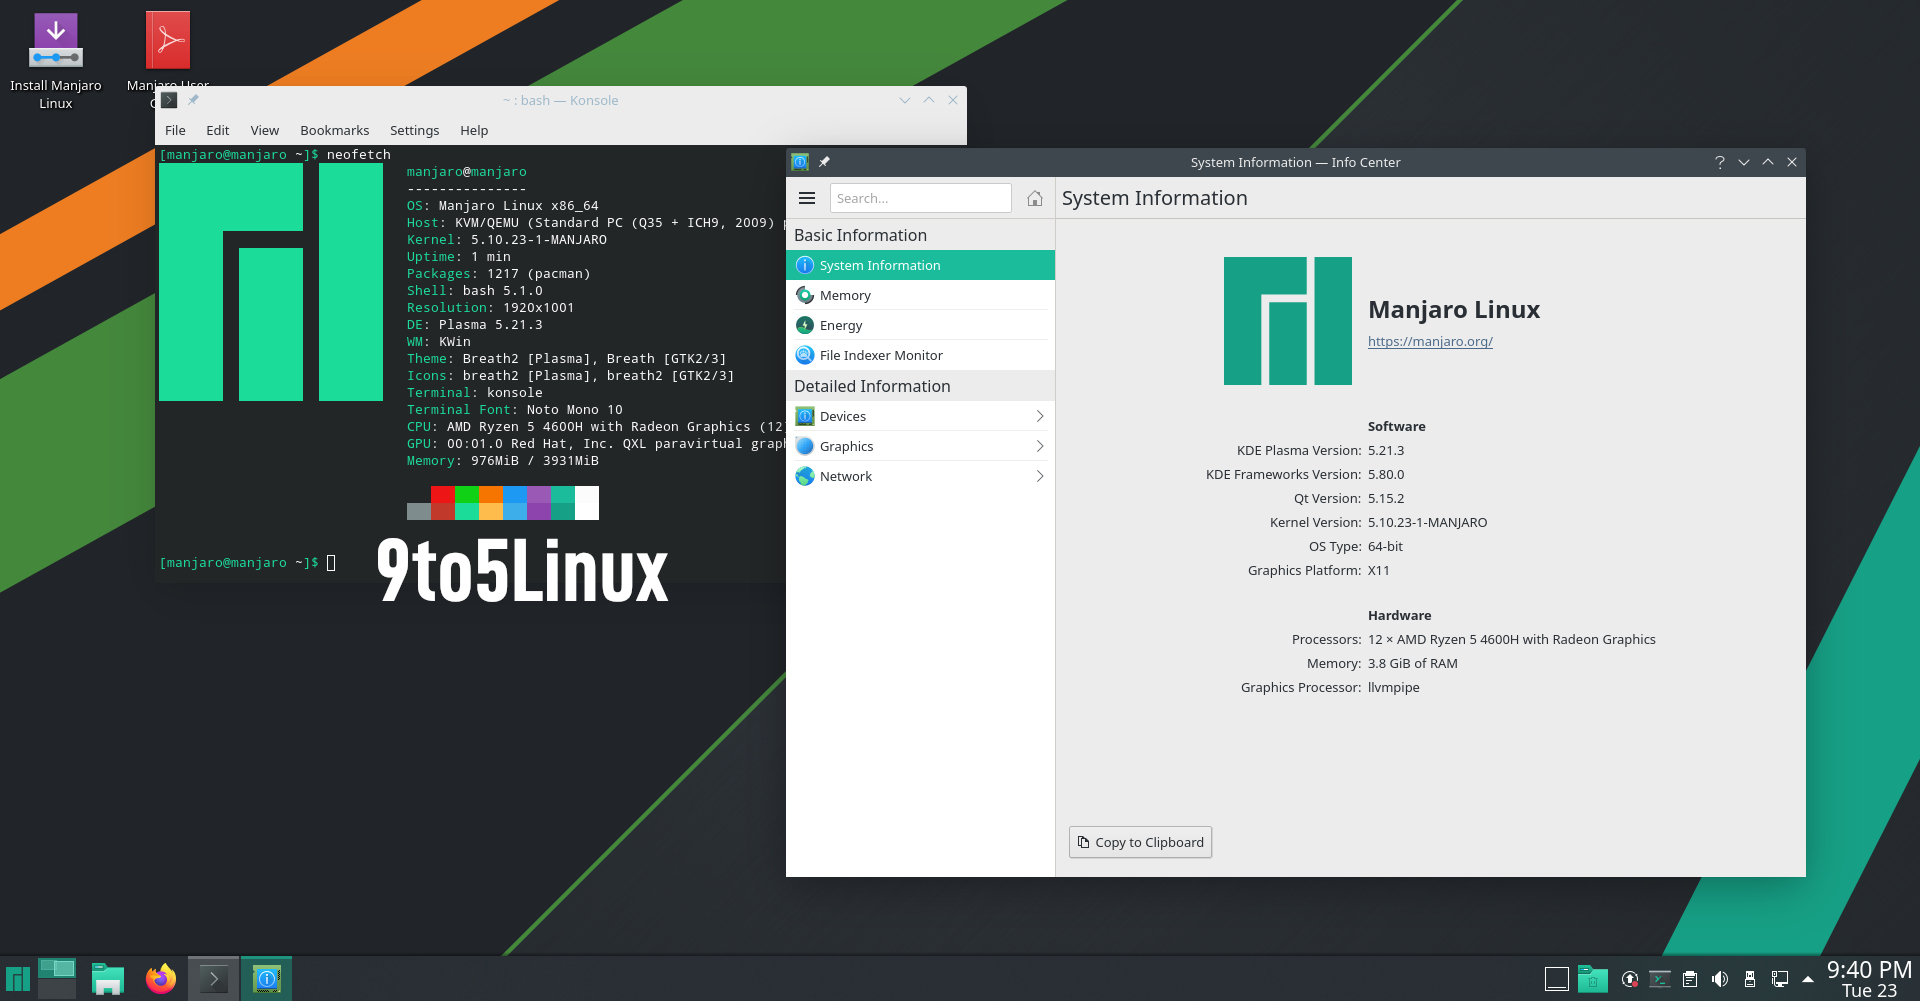 Manjaro Linux 21.0 “Ornara” Released with Linux 5.10 LTS, KDE Plasma 5.21, and Pamac 10